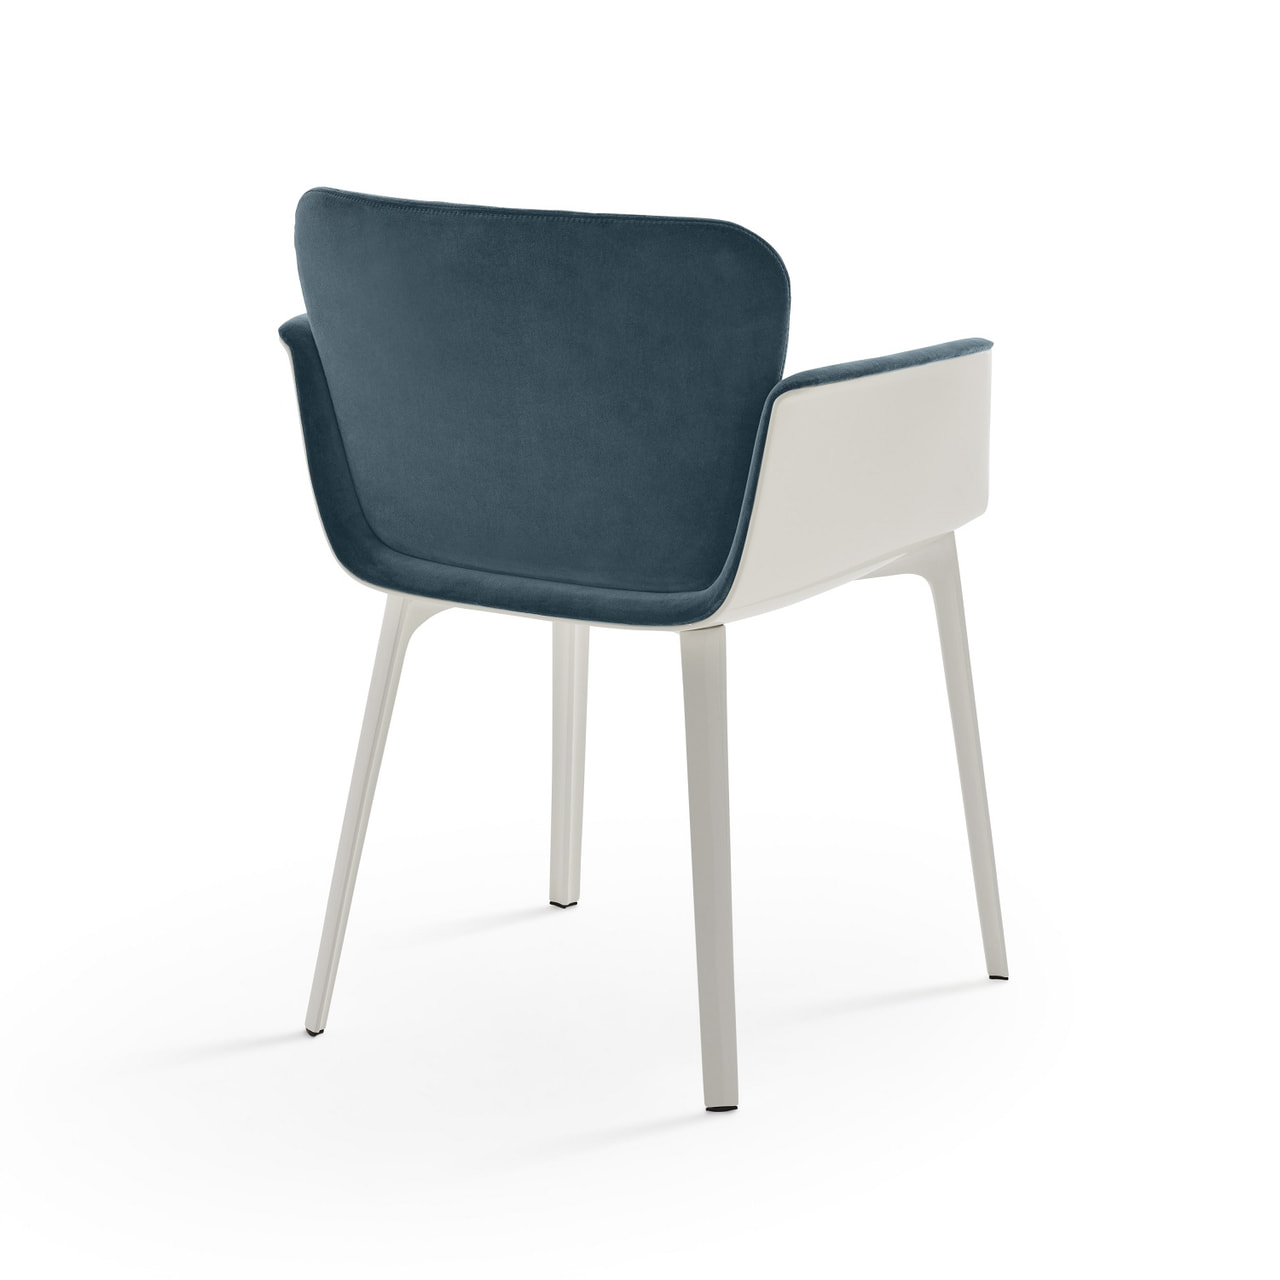 KN Collection by Knoll – KN 06 Armchair